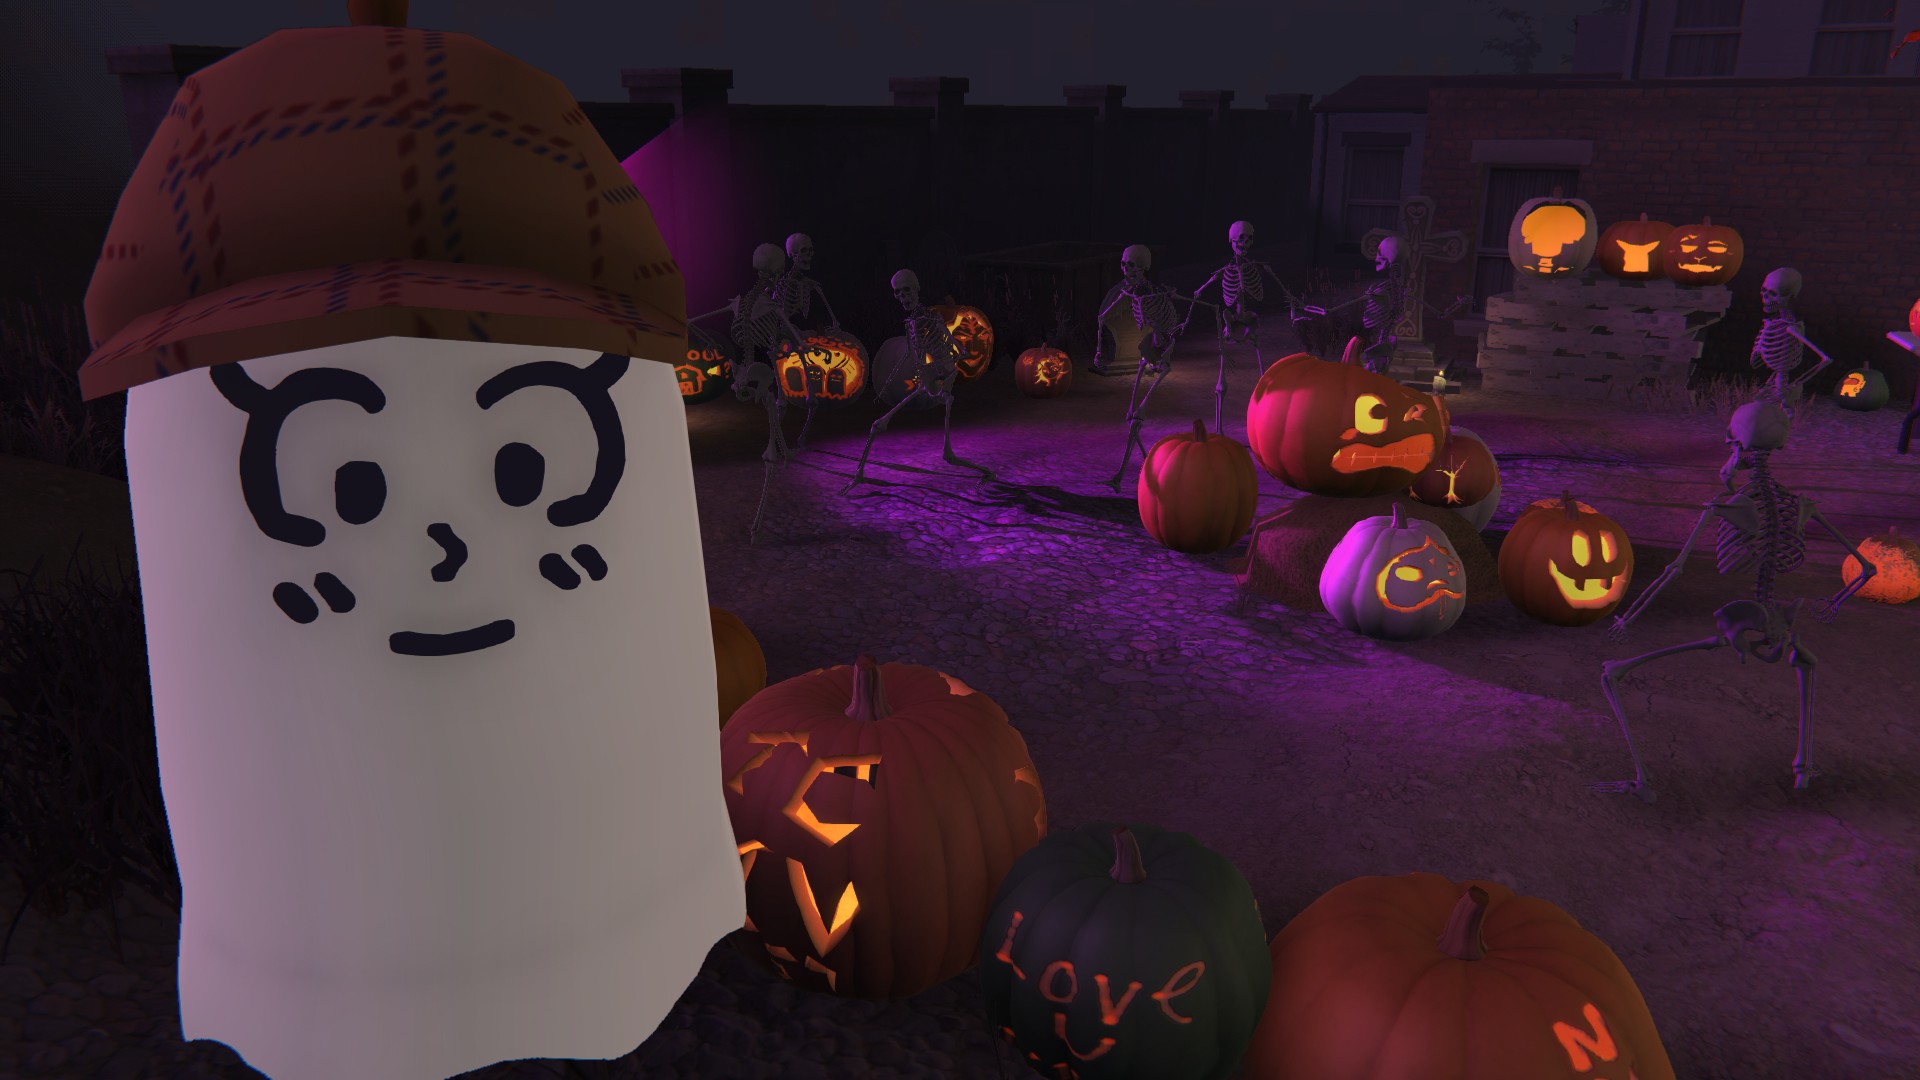 NEW* FREE CODE TRICK OR TREAT  Roblox Halloween Event GamePlay